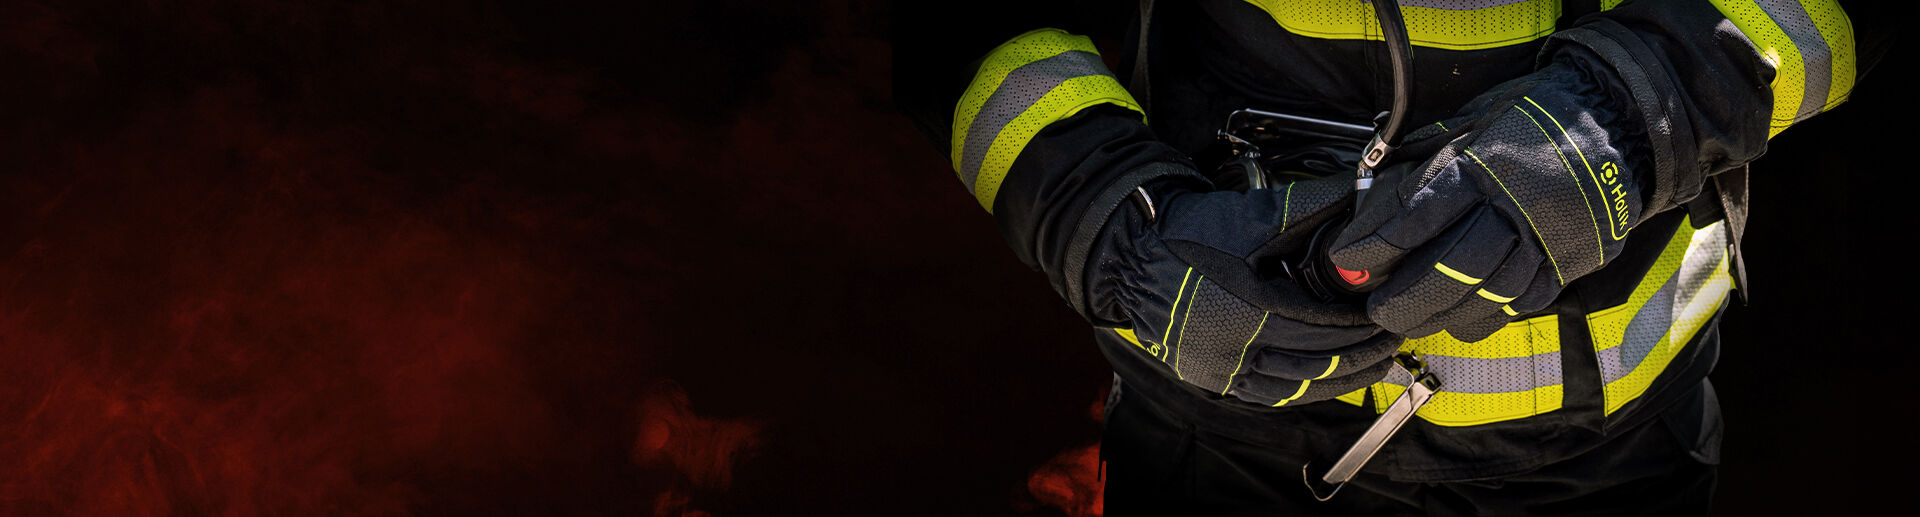 Firefighters gloves